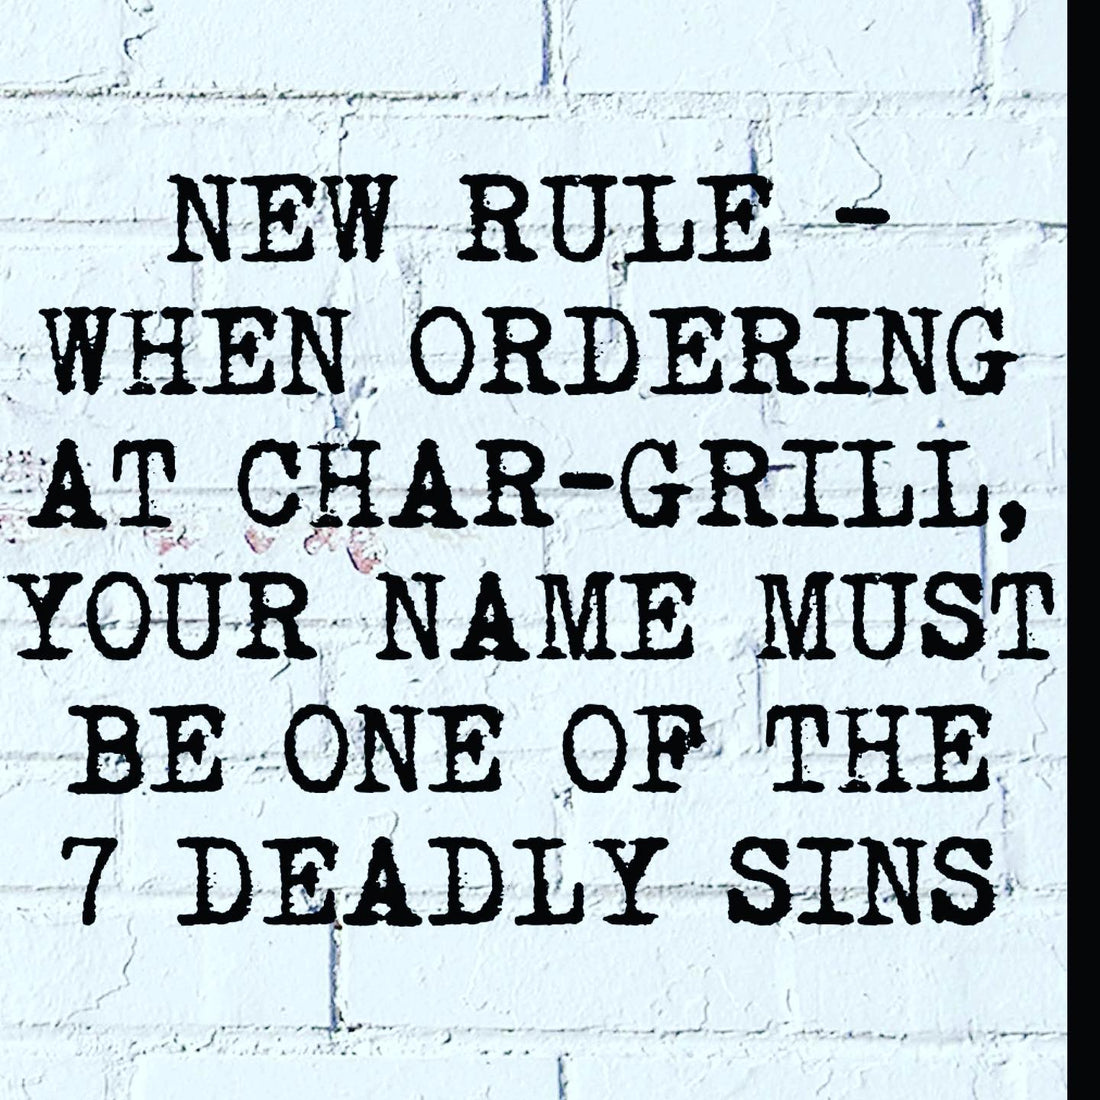 New rule. When order